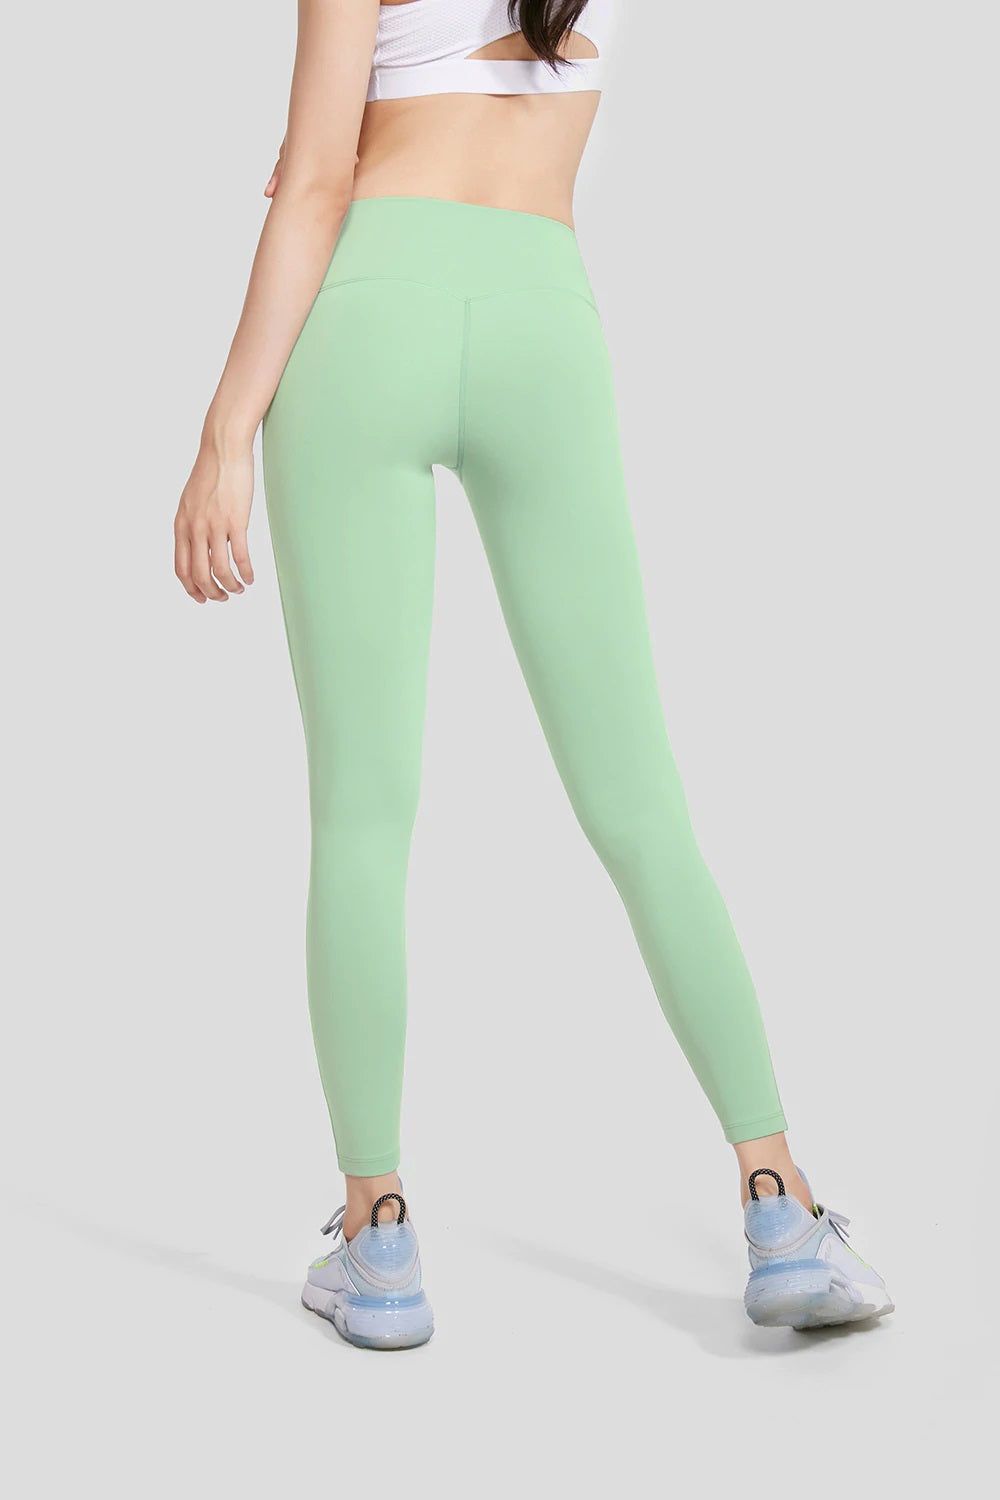 Aircatch Support 7/8 Legging